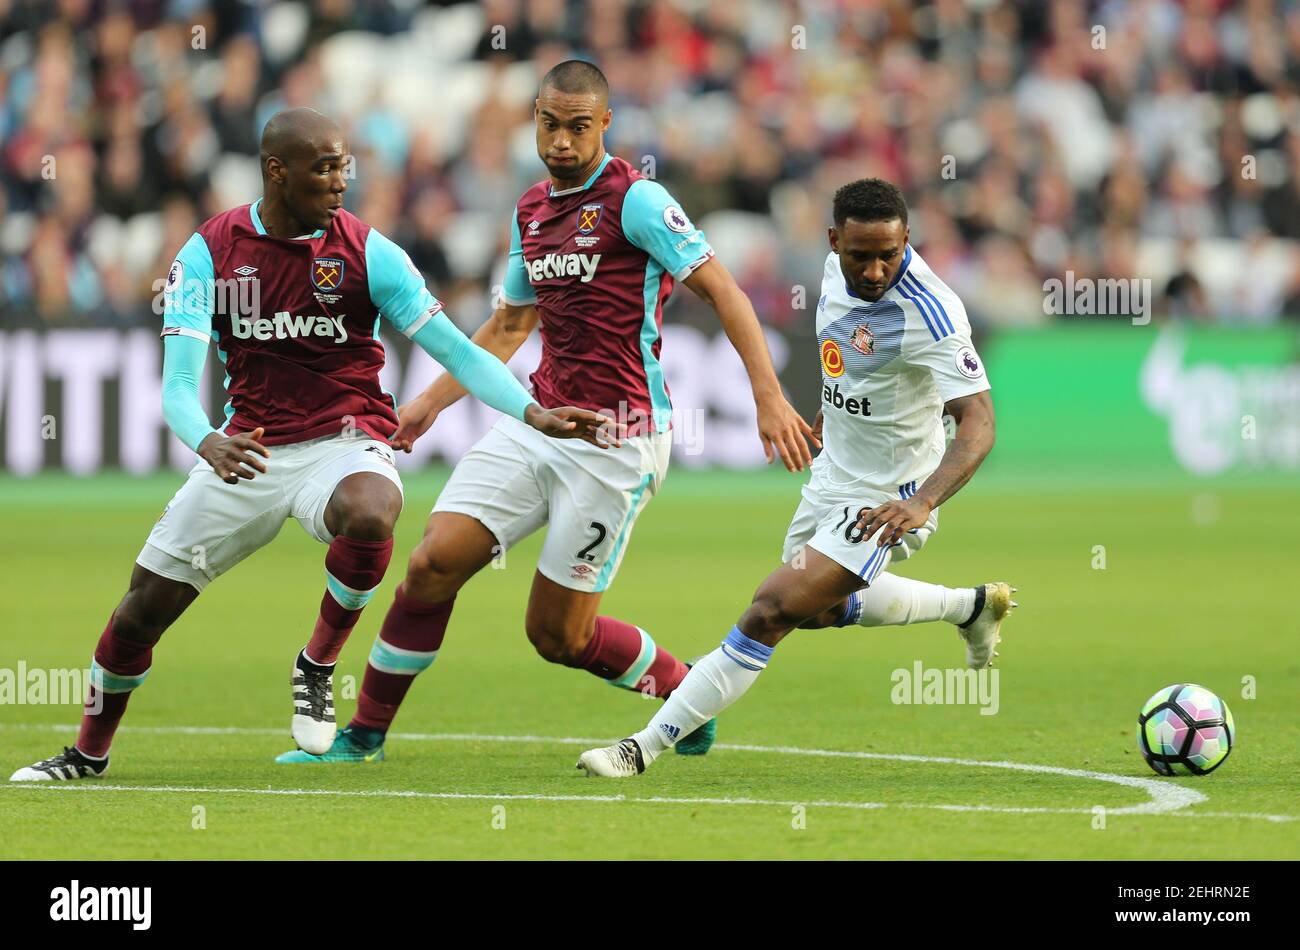 Britain Soccer Football - West Ham United v Sunderland - Premier League - London Stadium - 22/10/16 Sunderland's Jermain Defoe in action with West Ham United's Winston Reid and Angelo Ogbonna  Reuters / Paul Hackett Livepic EDITORIAL USE ONLY. No use with unauthorized audio, video, data, fixture lists, club/league logos or 'live' services. Online in-match use limited to 45 images, no video emulation. No use in betting, games or single club/league/player publications.  Please contact your account representative for further details. Stock Photo